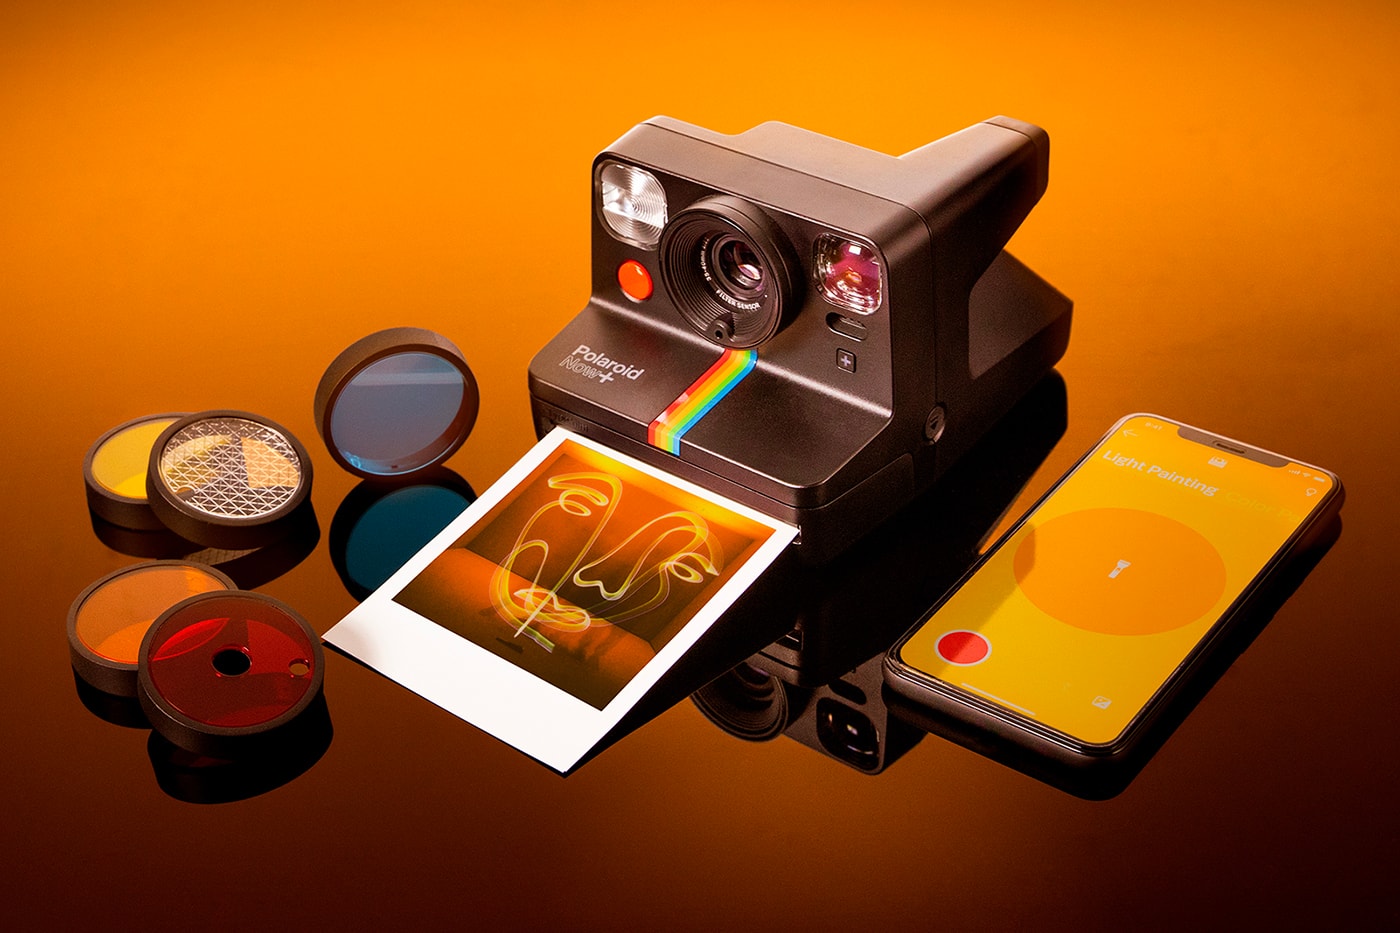 Polaroid Encourages Experimental Photography Versatile Now Plus Analog Instant Camera snap on lense Bluetooth aperture priority tripod mode connectivity release info